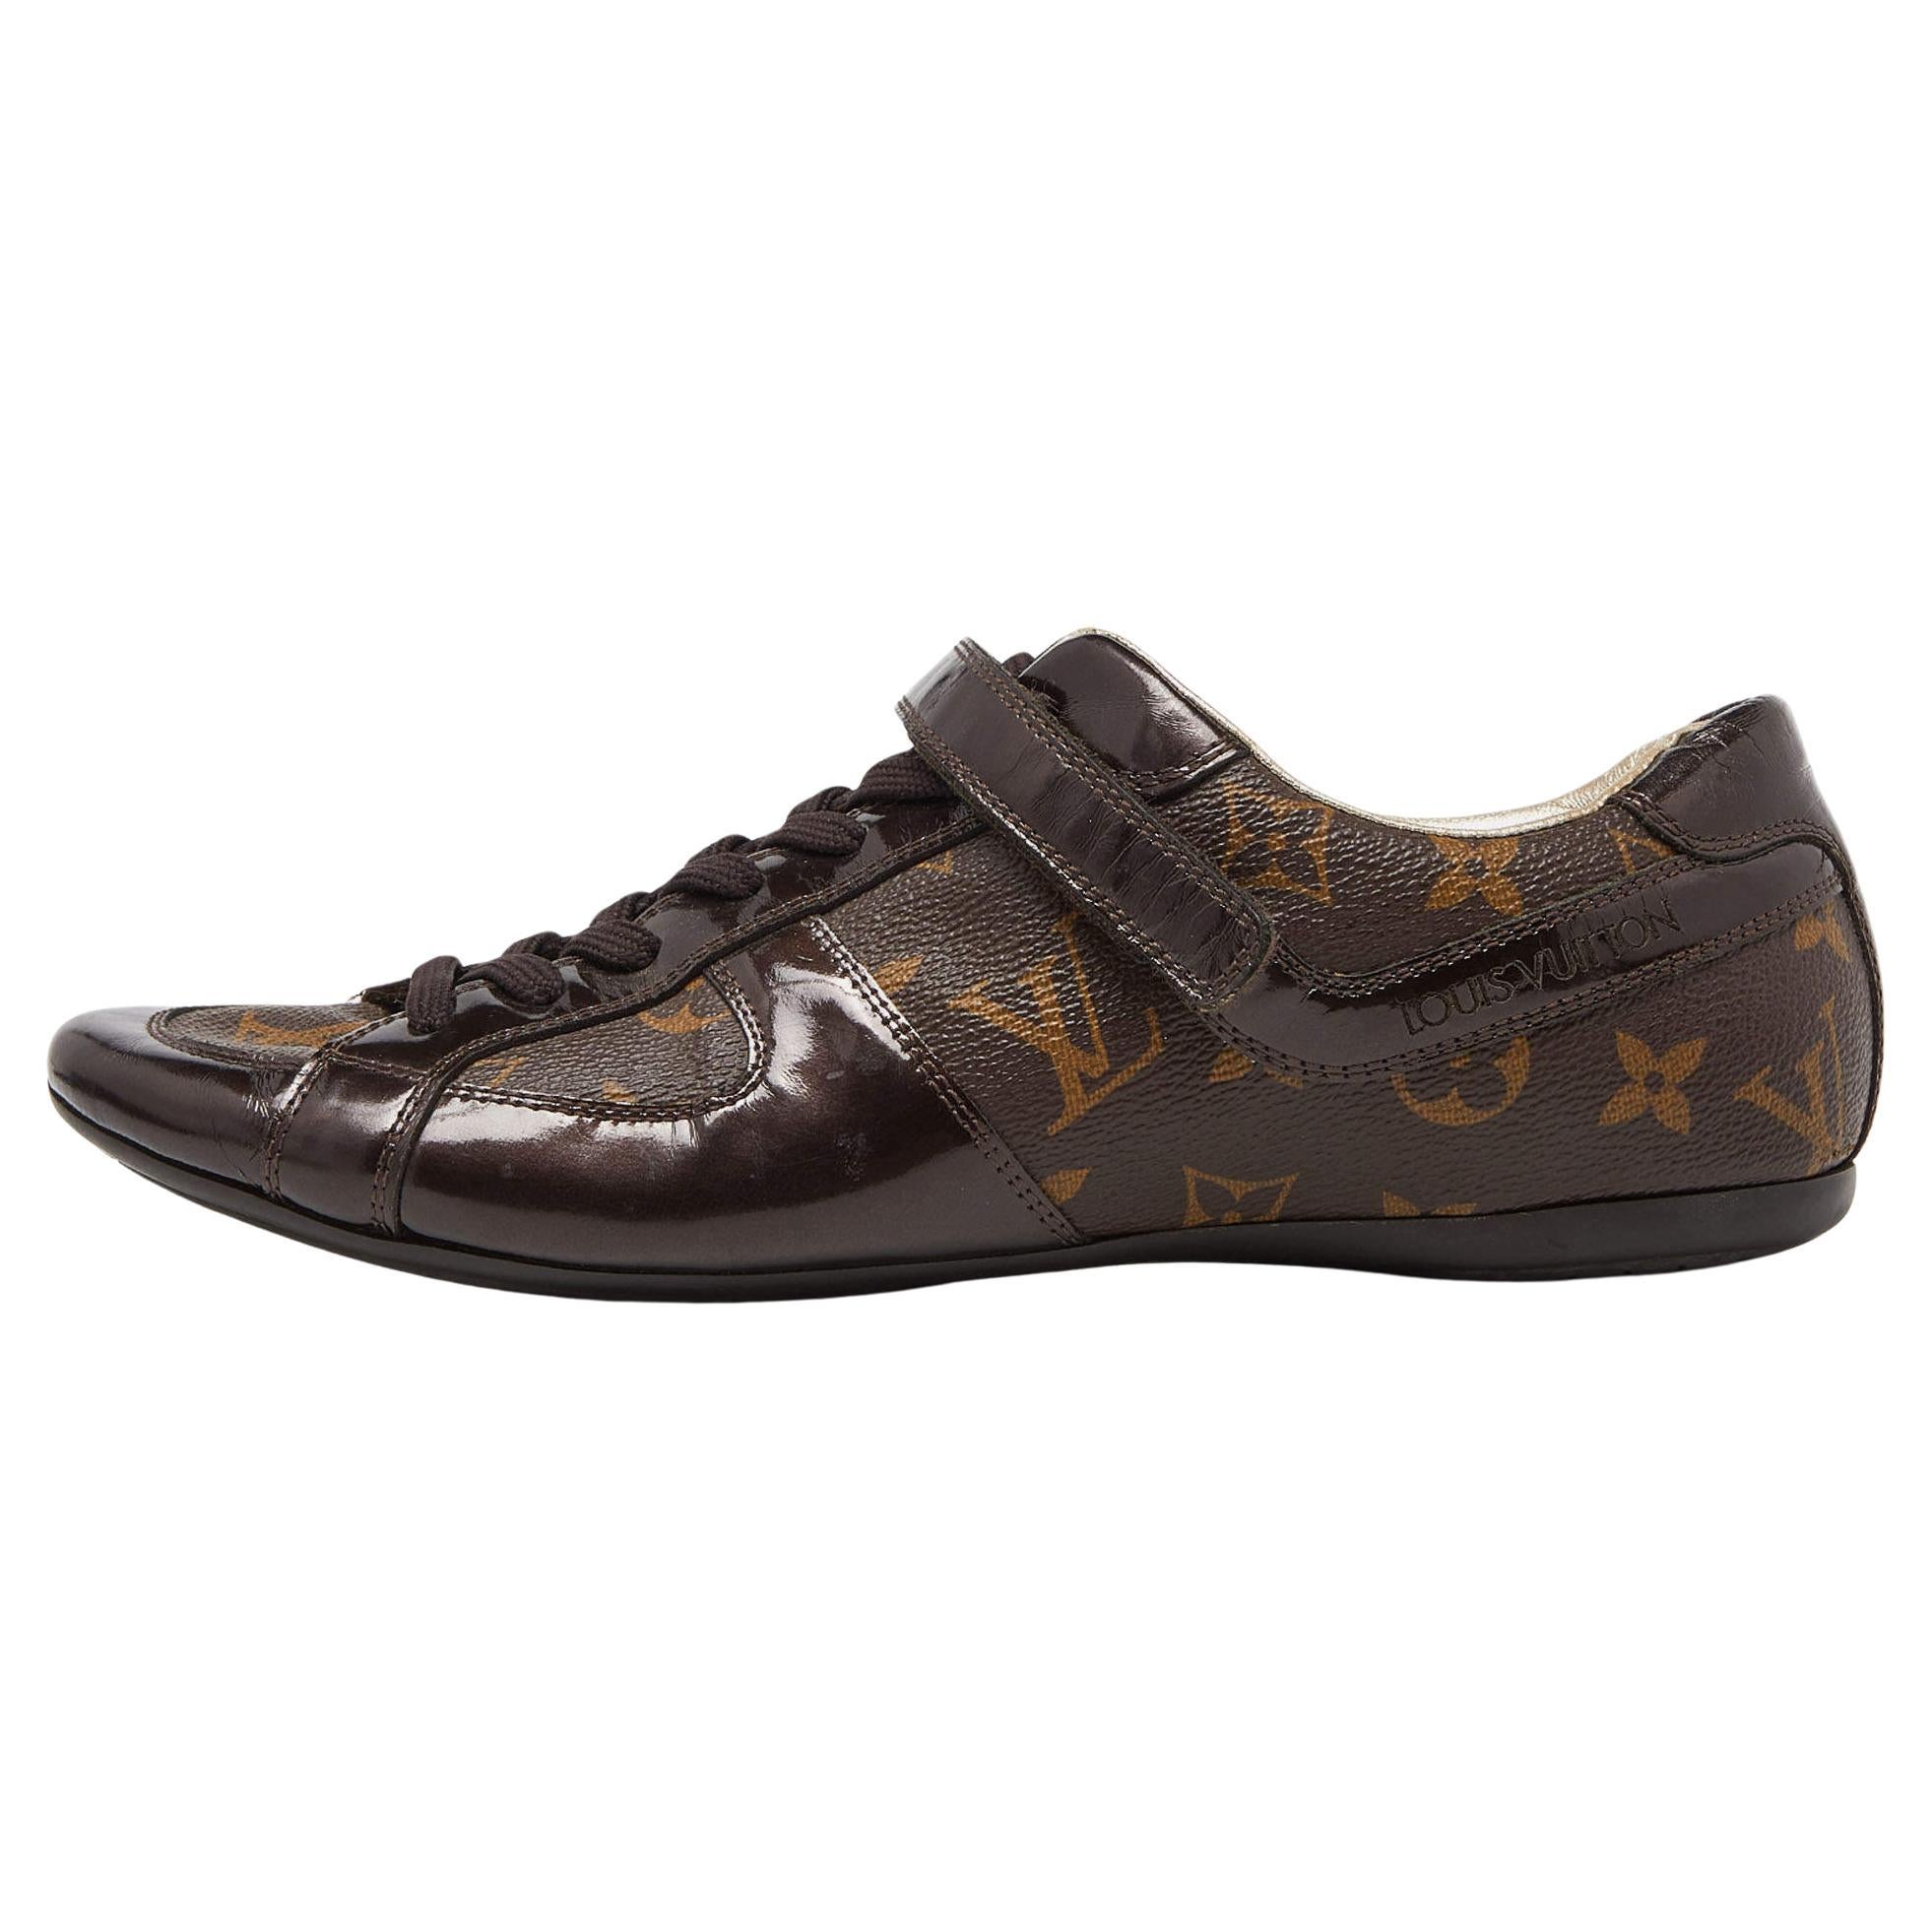 Louis Vuitton Brown Monogram Canvas and Patent Leather Gloe Trotter Sneakers Siz